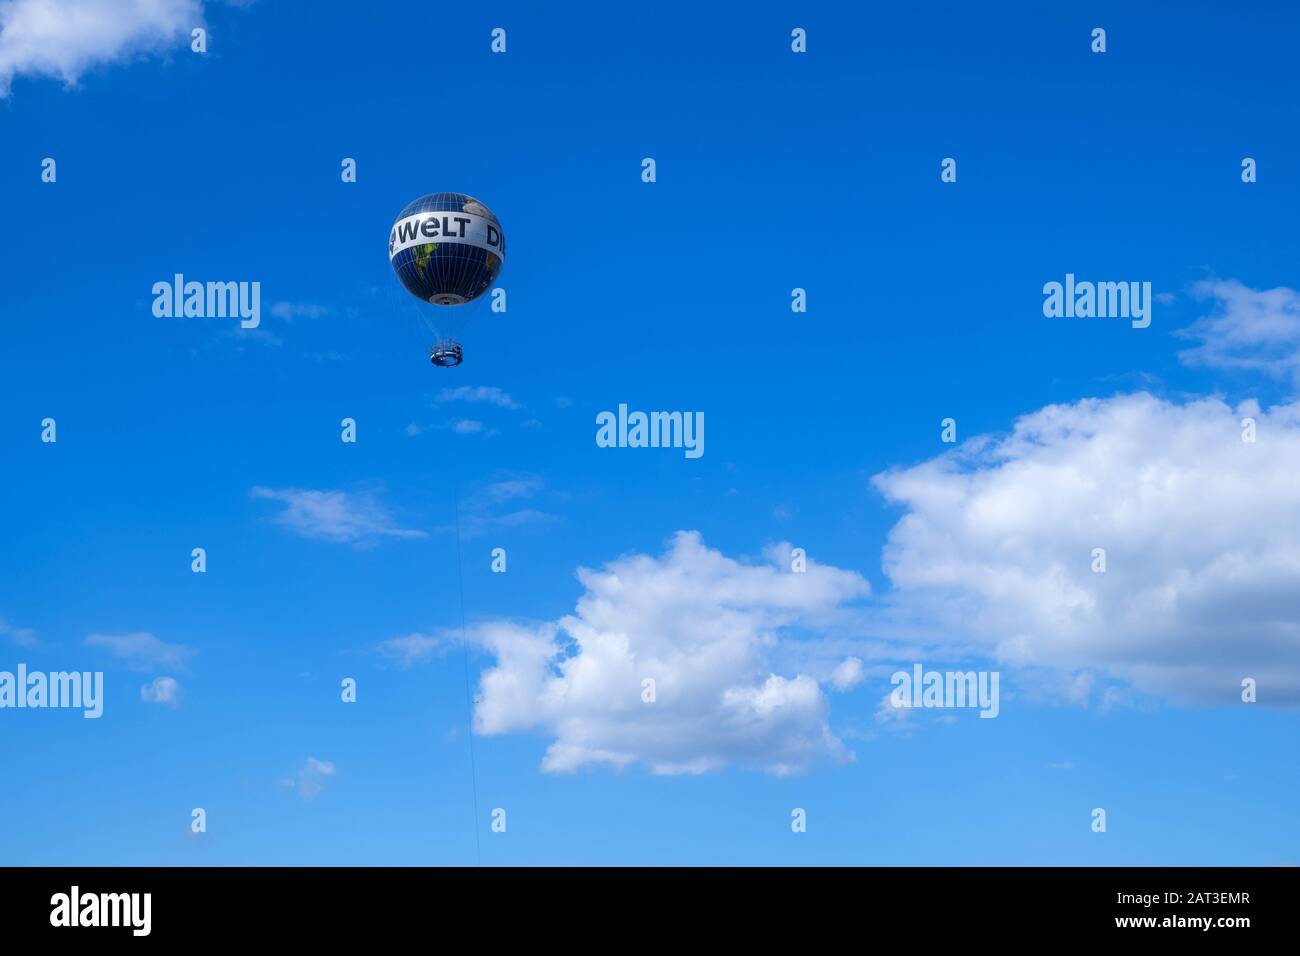 Berlin, Berlin state / Germany - 2018/07/24: Sightseeing balloon flyting over eastern districts of Berlin Stock Photo